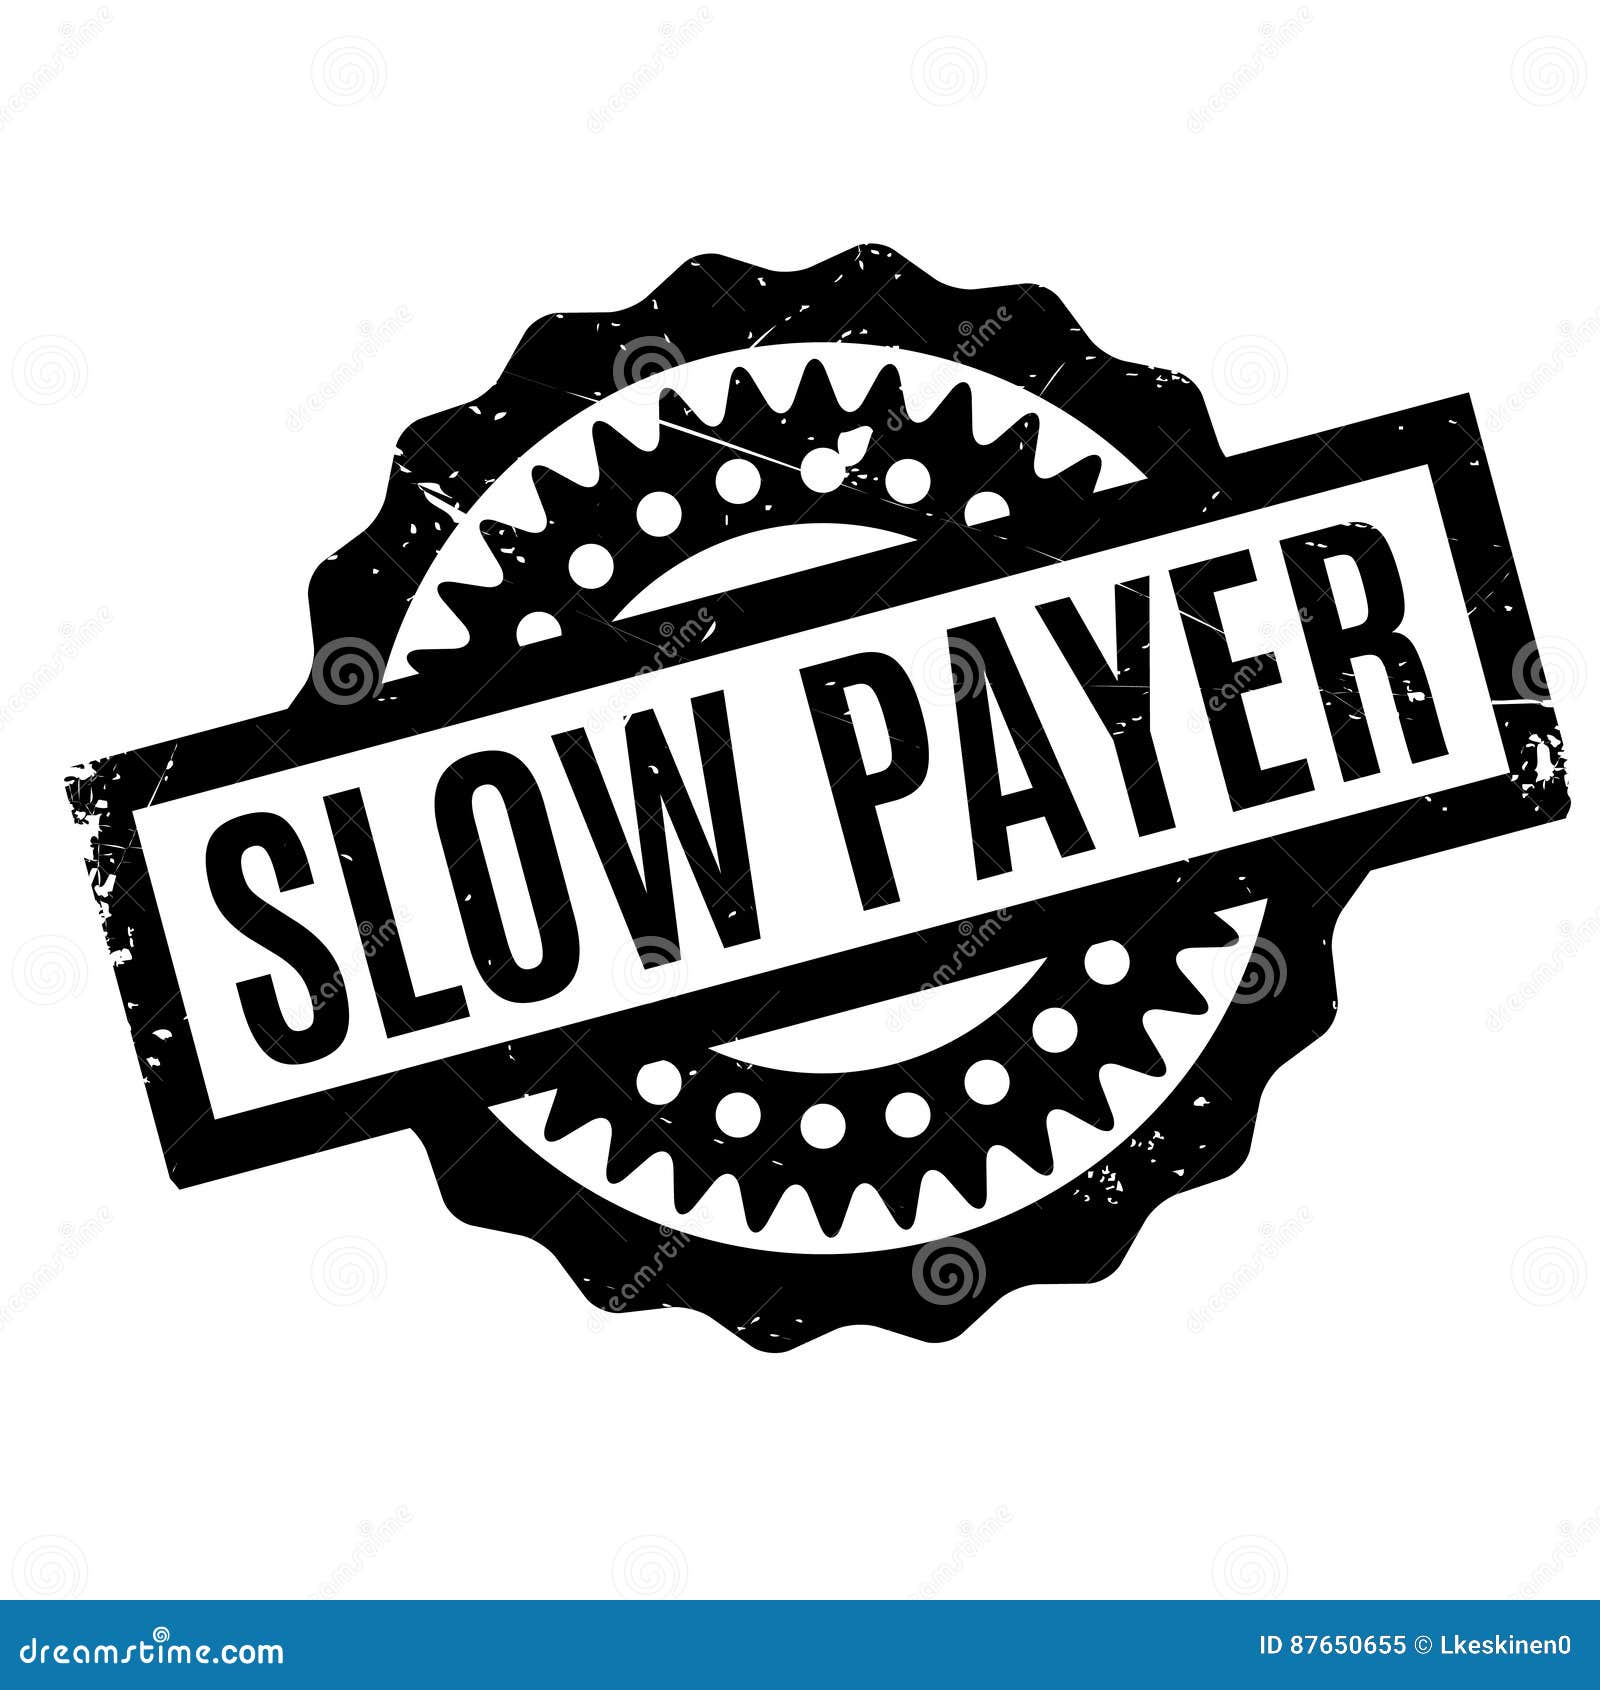 slow payer rubber stamp